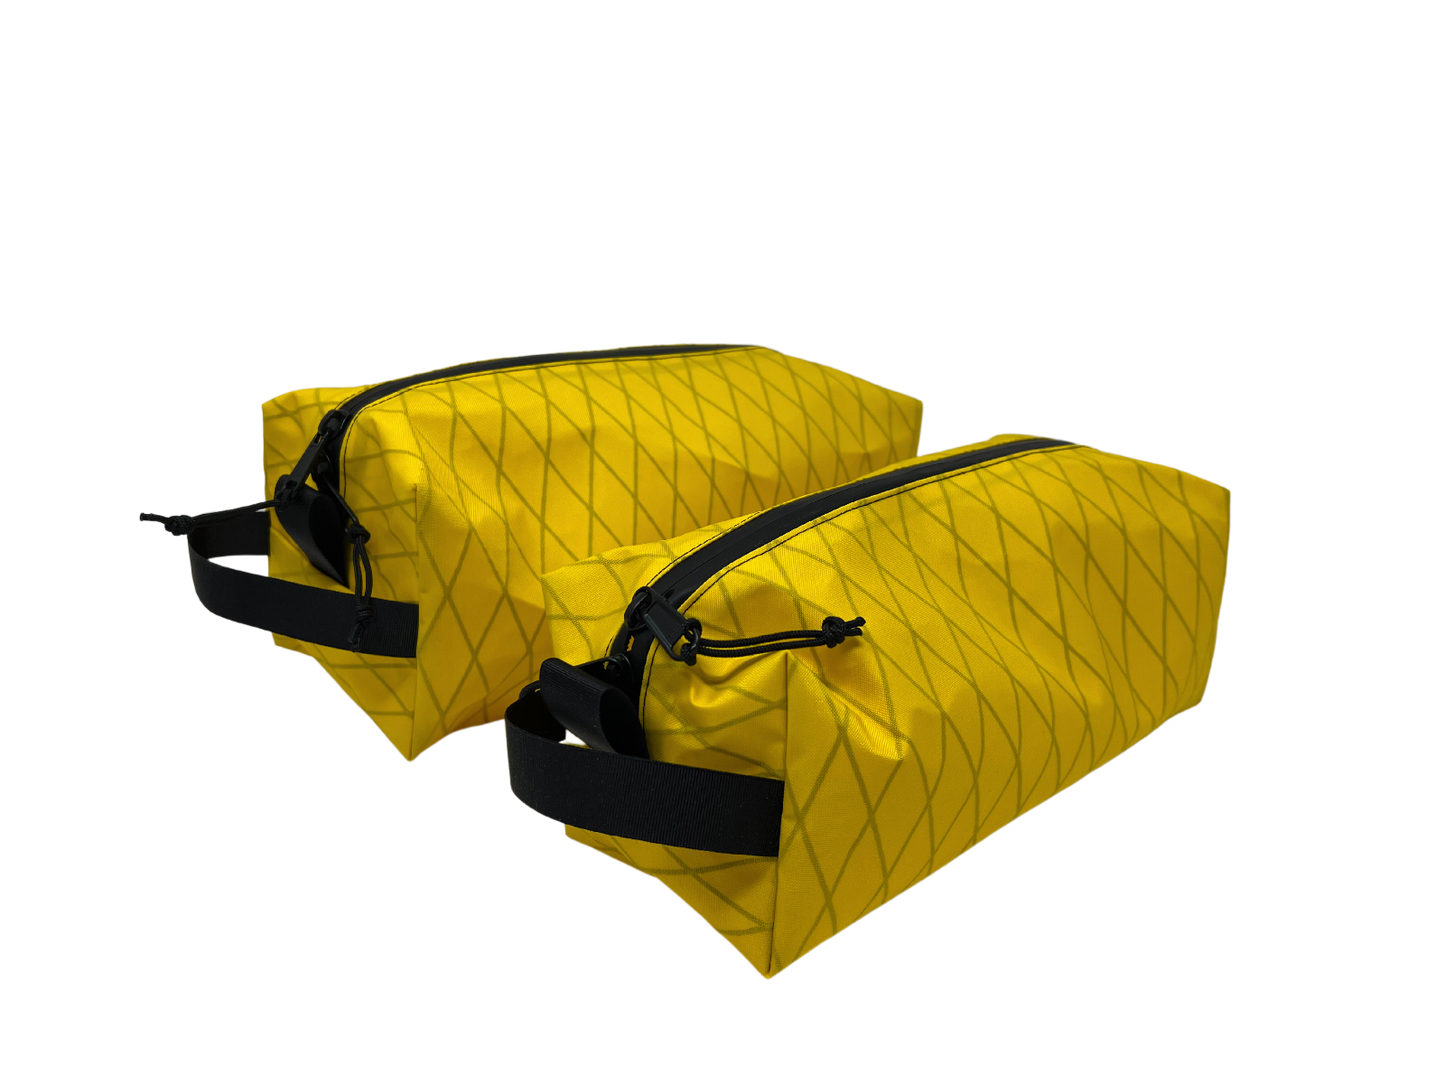 Hartford Gear - X-Pac Packing Pods